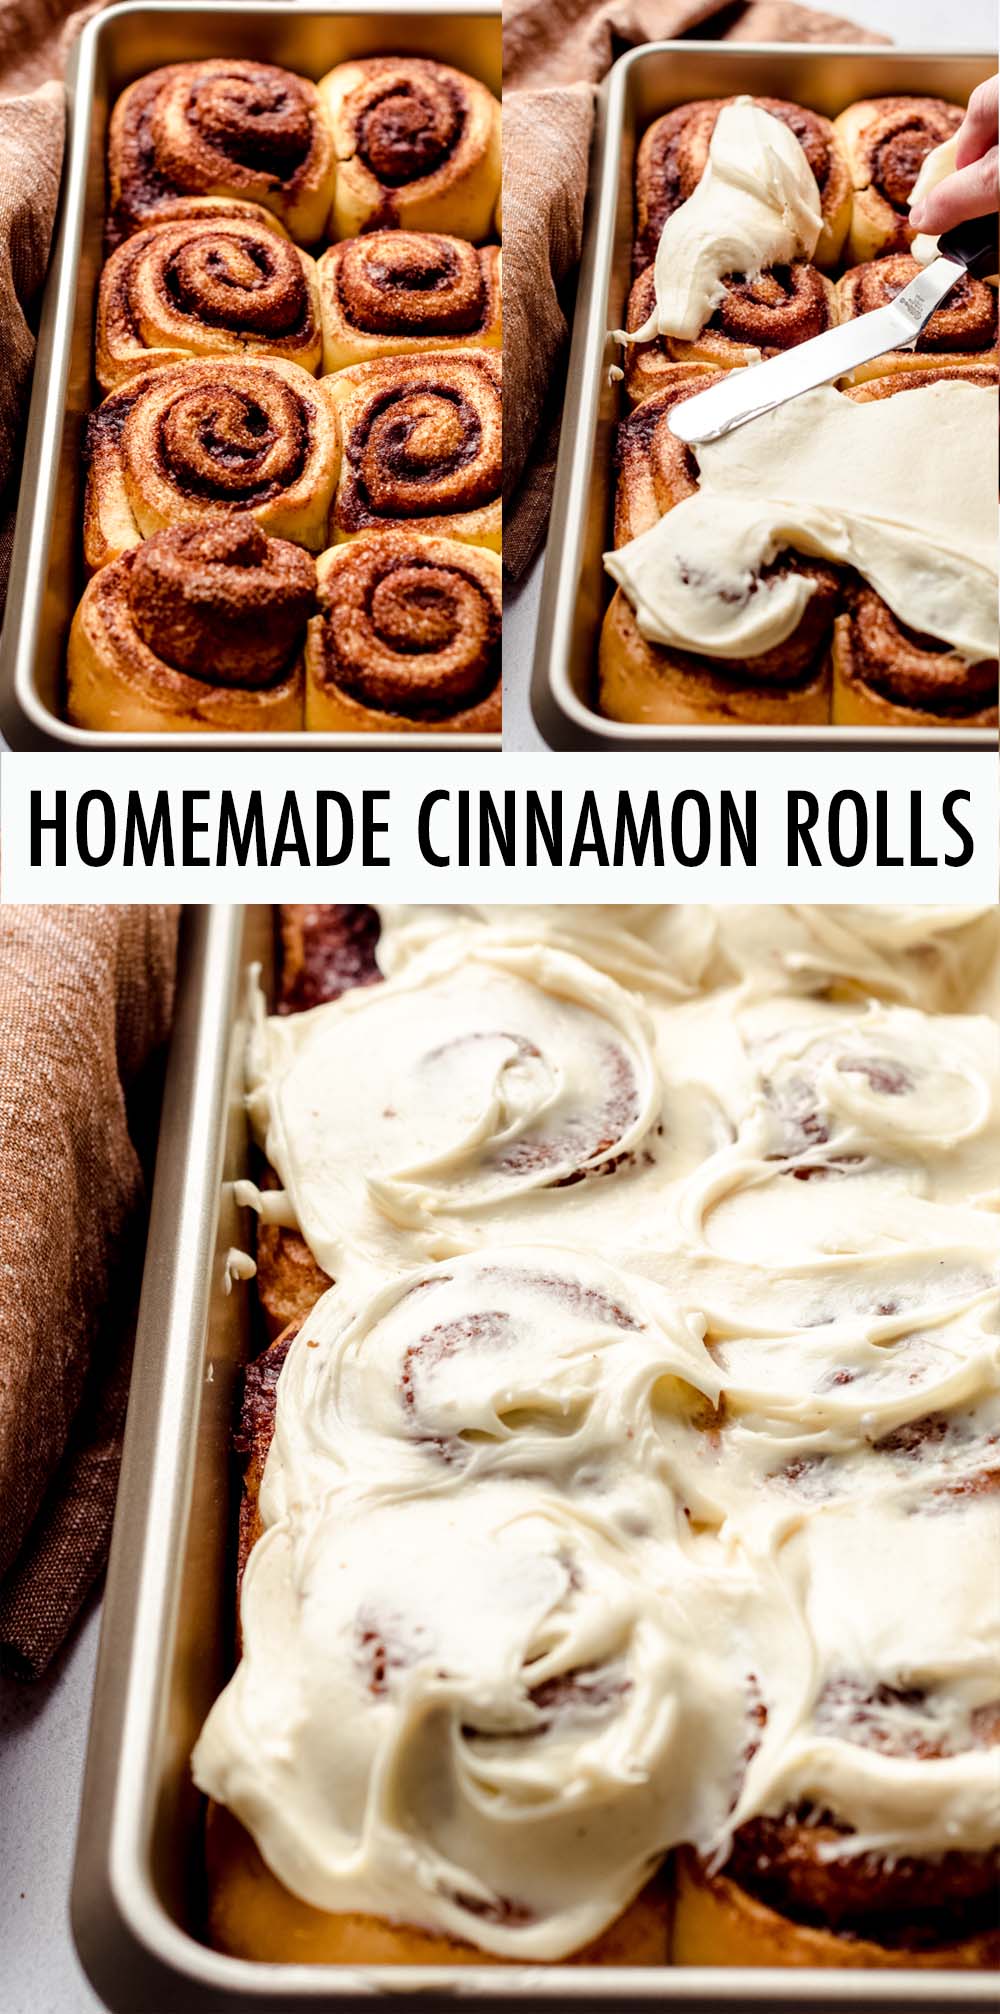 Soft and fluffy enriched yeast rolls filled with a buttery cinnamon filling and topped with a silky smooth cream cheese frosting. These fluffy cinnamon rolls only have one rise and can be made ahead of time and left in the refrigerator to bake in the morning. via @frshaprilflours